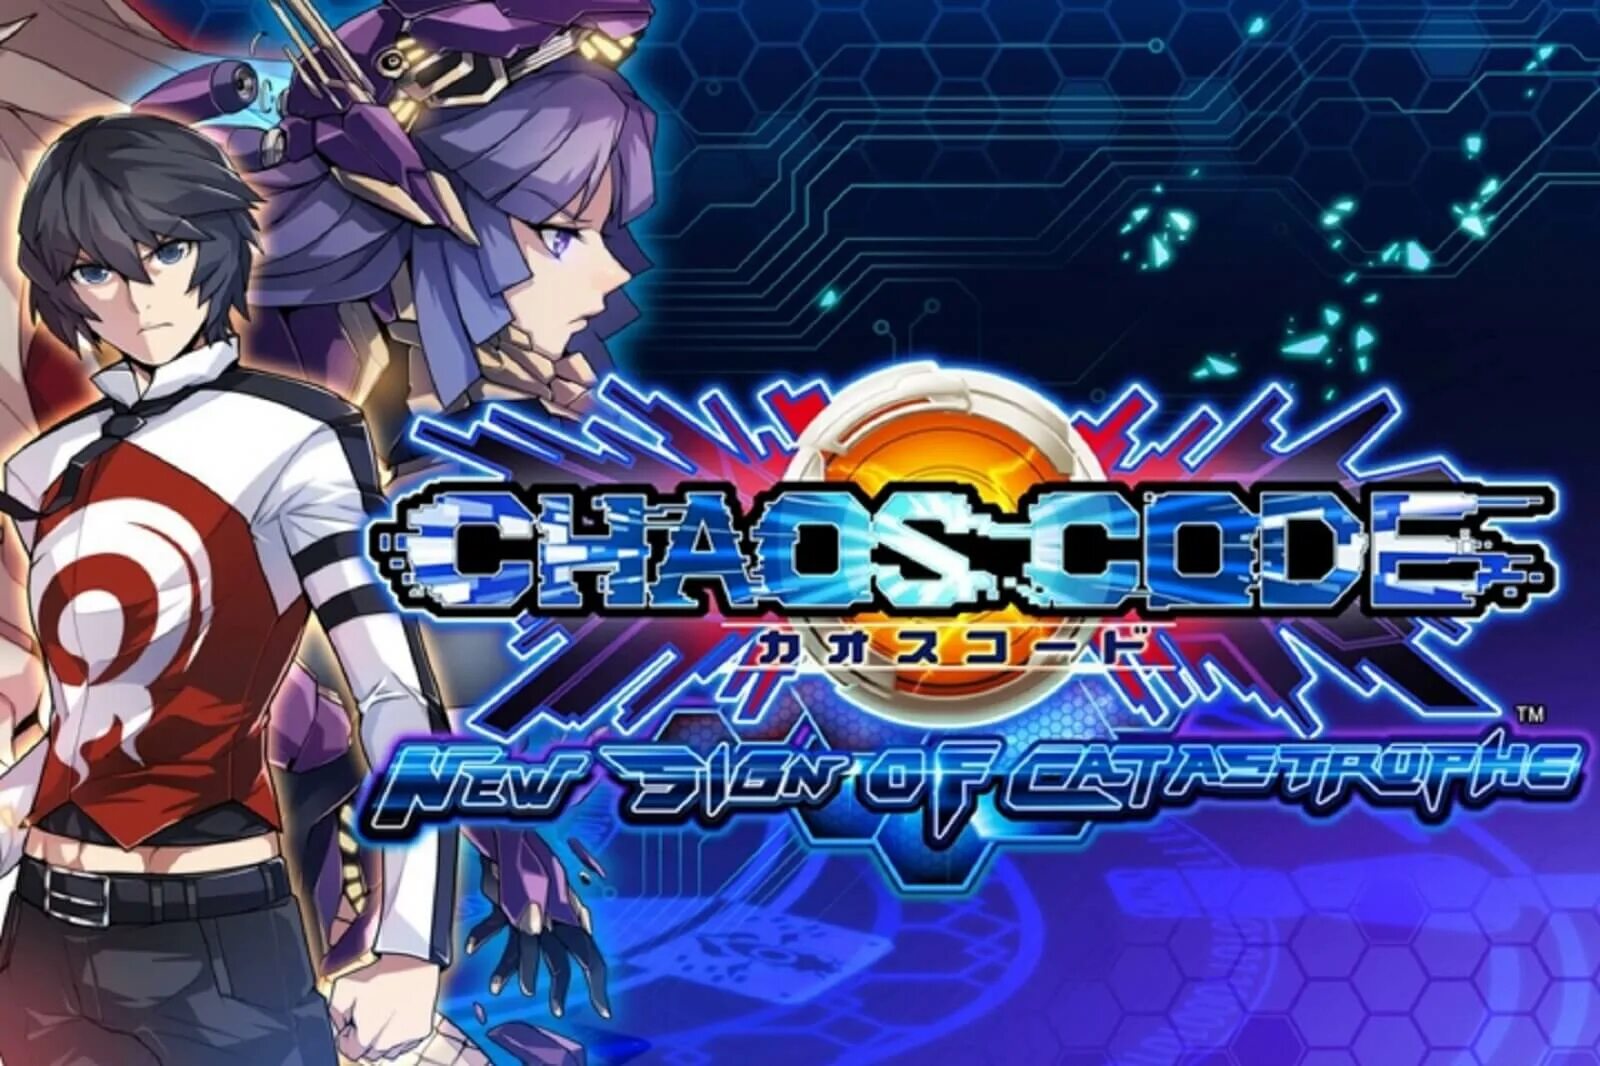 Chaos code. Chaos code New sign of Catastrophe. Макина хаос. Chaos code PC.